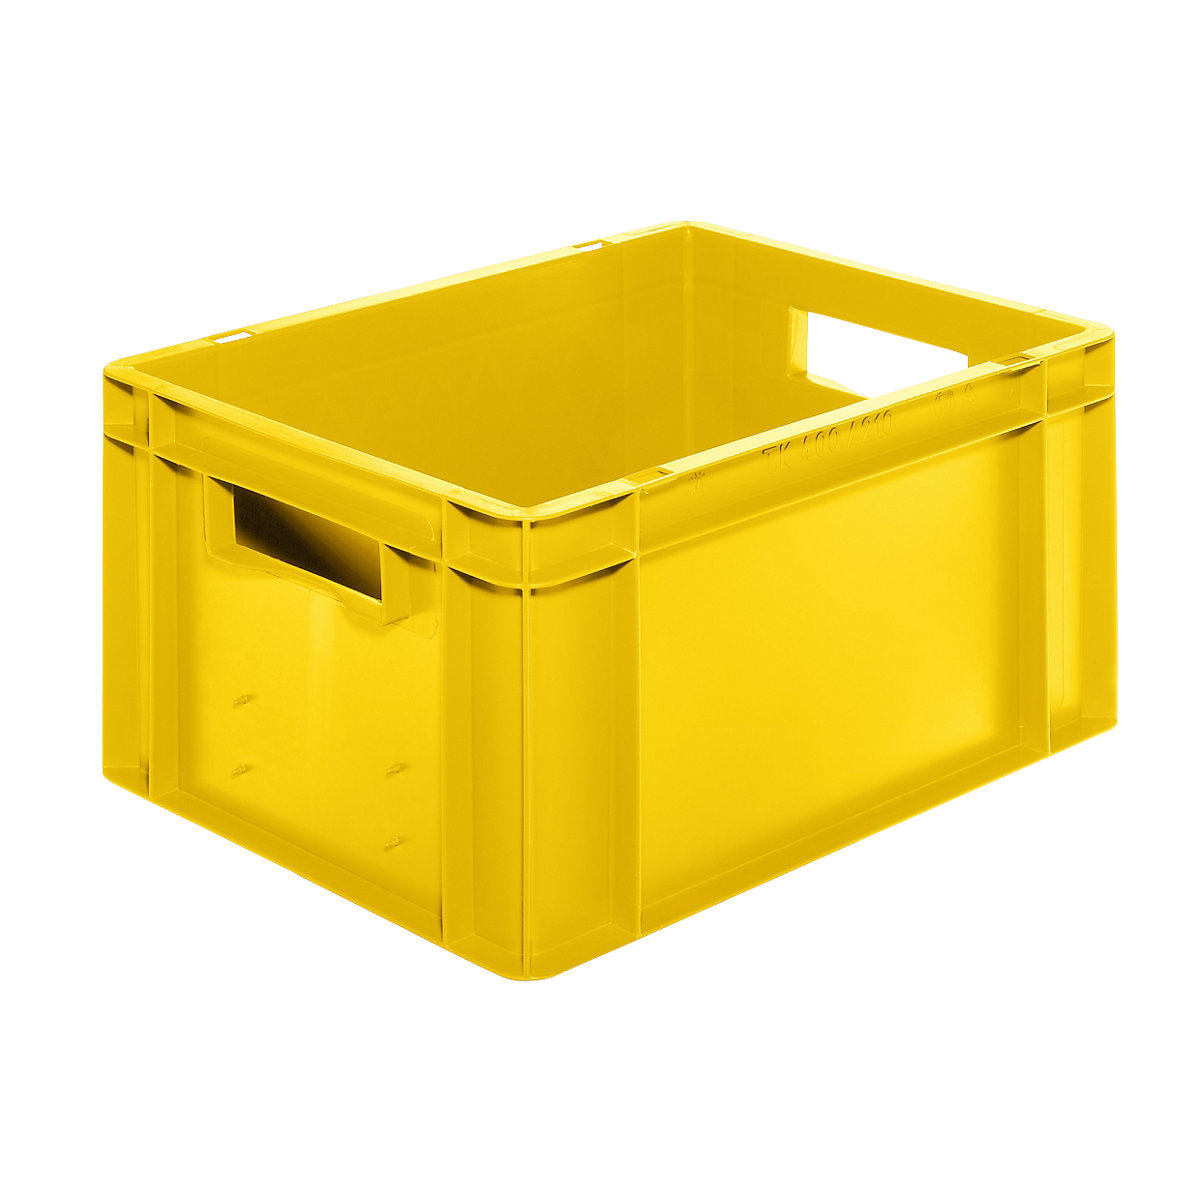 Euro stacking container, closed walls and base, LxWxH 400 x 300 x 210 mm, yellow, pack of 5